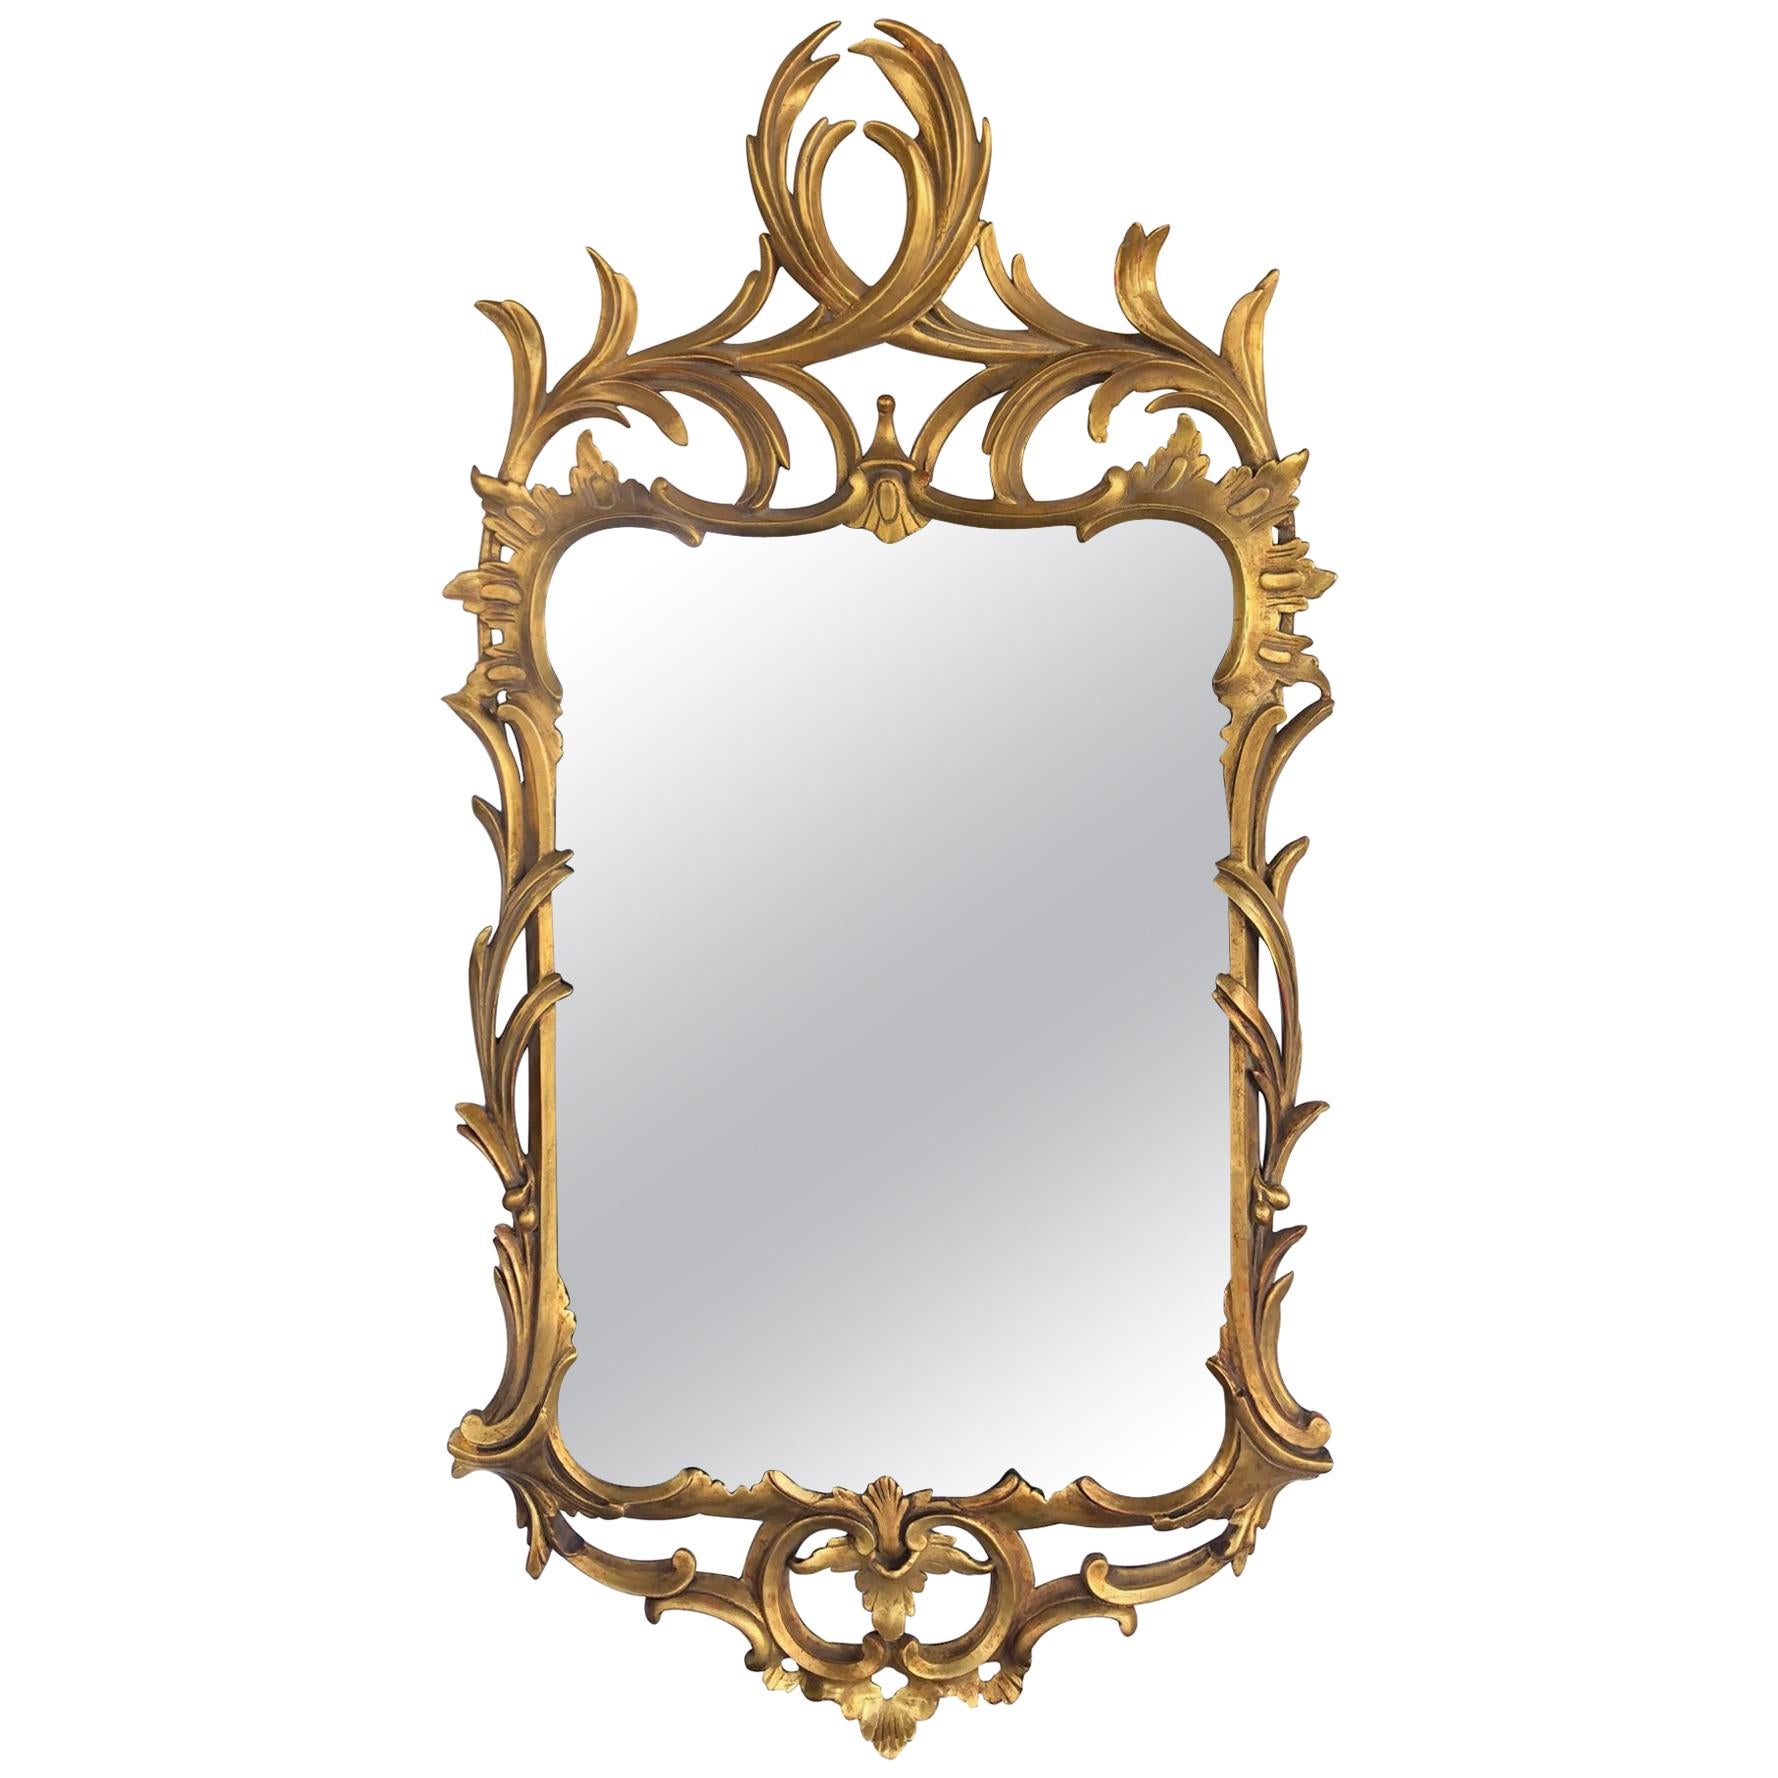 Hand-Carved Continental Rococo Revival Foliate Giltwood Mirror For Sale